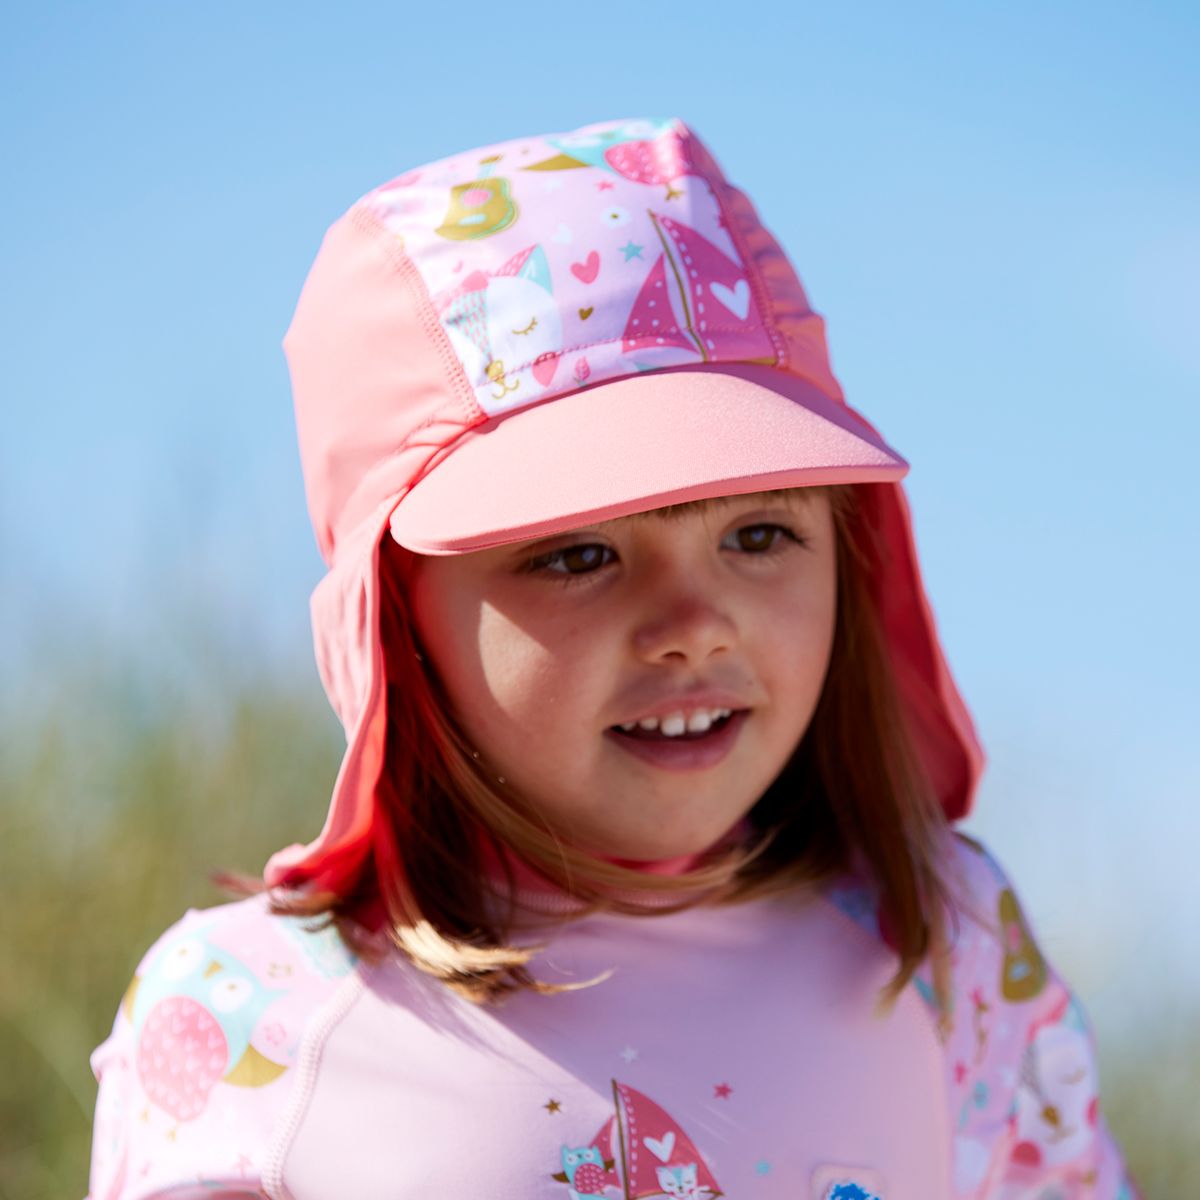 Lifestyle image of toddler wearing a legionnaire style sun hat in the beach. The hat is reddish pink and baby pink, with the owl and the pussycat themed print panel. She's also wearing matching sun and sea wetsuit. Close-up.